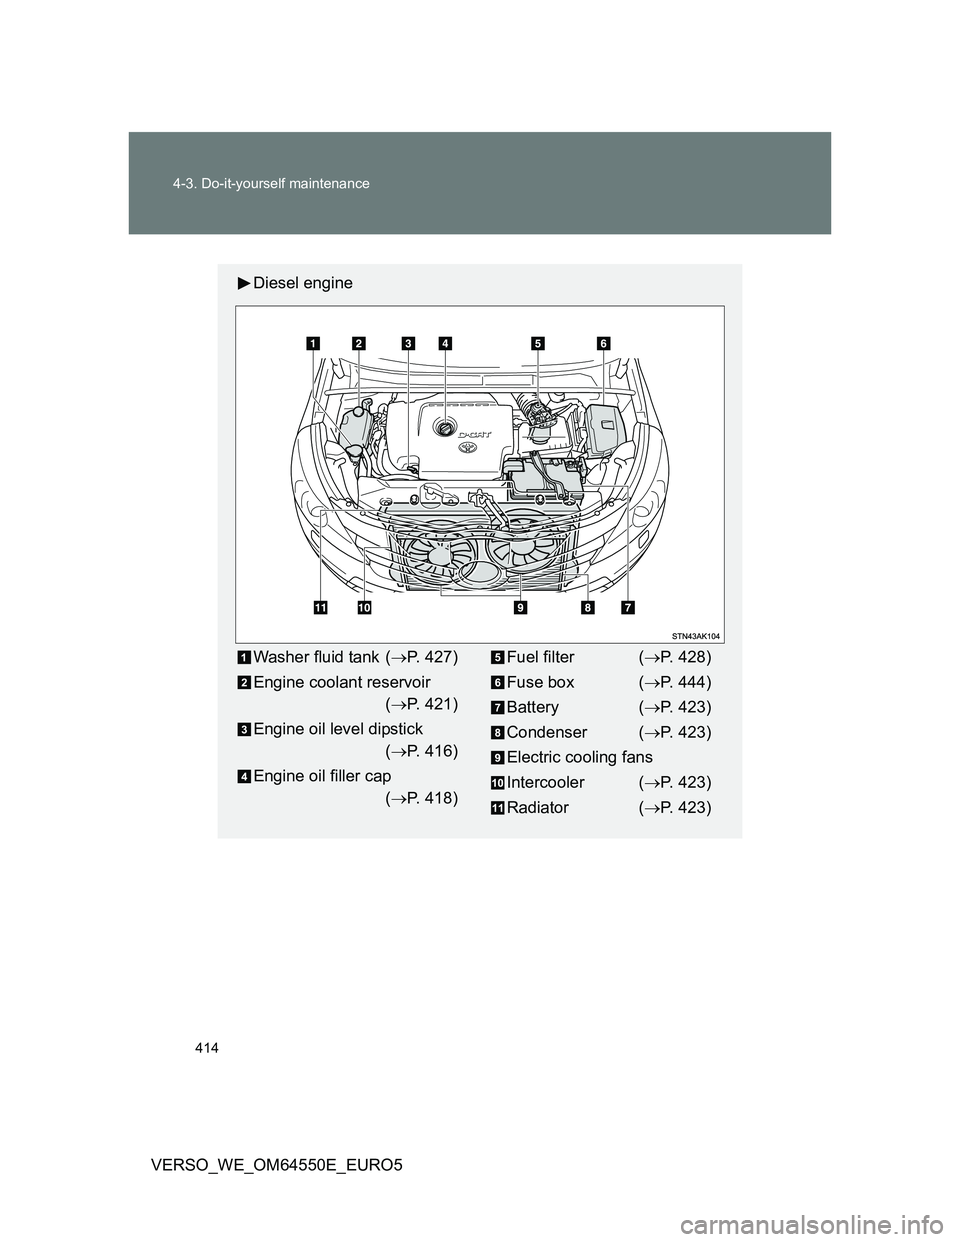 TOYOTA VERSO 2013  Owners Manual 414 4-3. Do-it-yourself maintenance
VERSO_WE_OM64550E_EURO5
Diesel engine
Washer fluid tank (P. 427)
Engine coolant reservoir 
(P. 421)
Engine oil level dipstick 
(P. 416)
Engine oil filler c